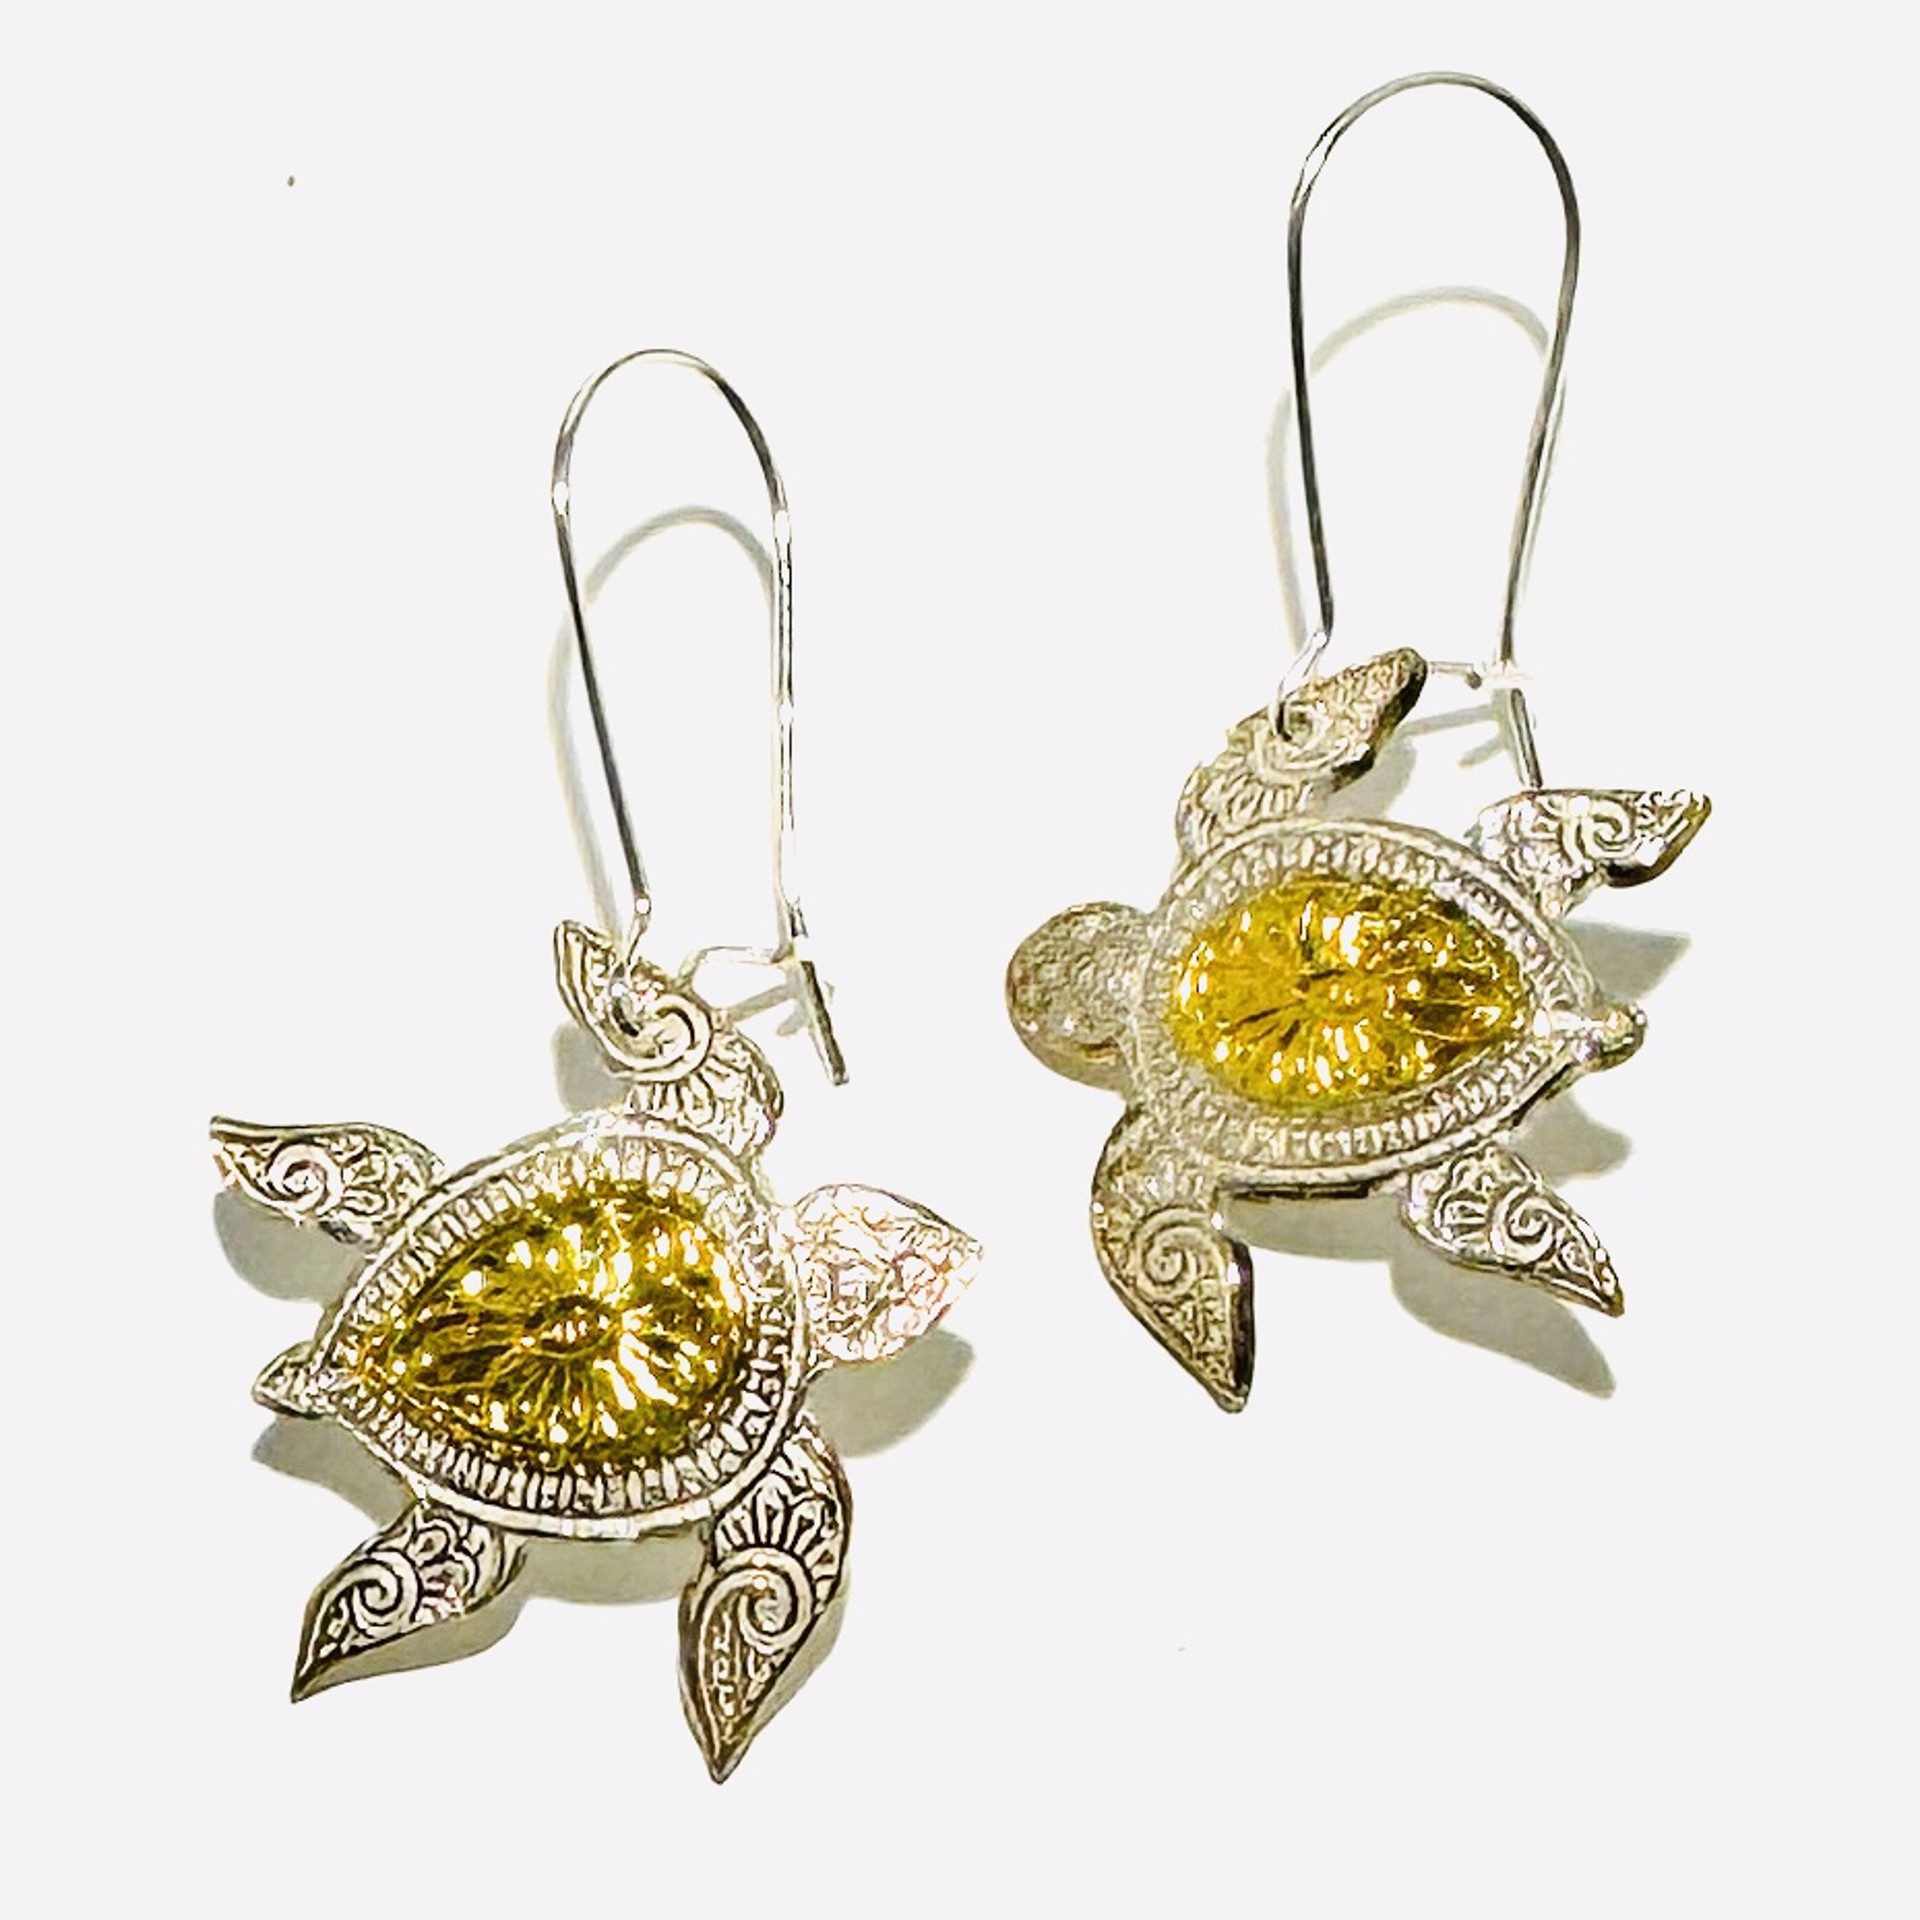 Keum-boo Fine Silver and Gold Turtle Earrings KH23-38 by Karen Hakim